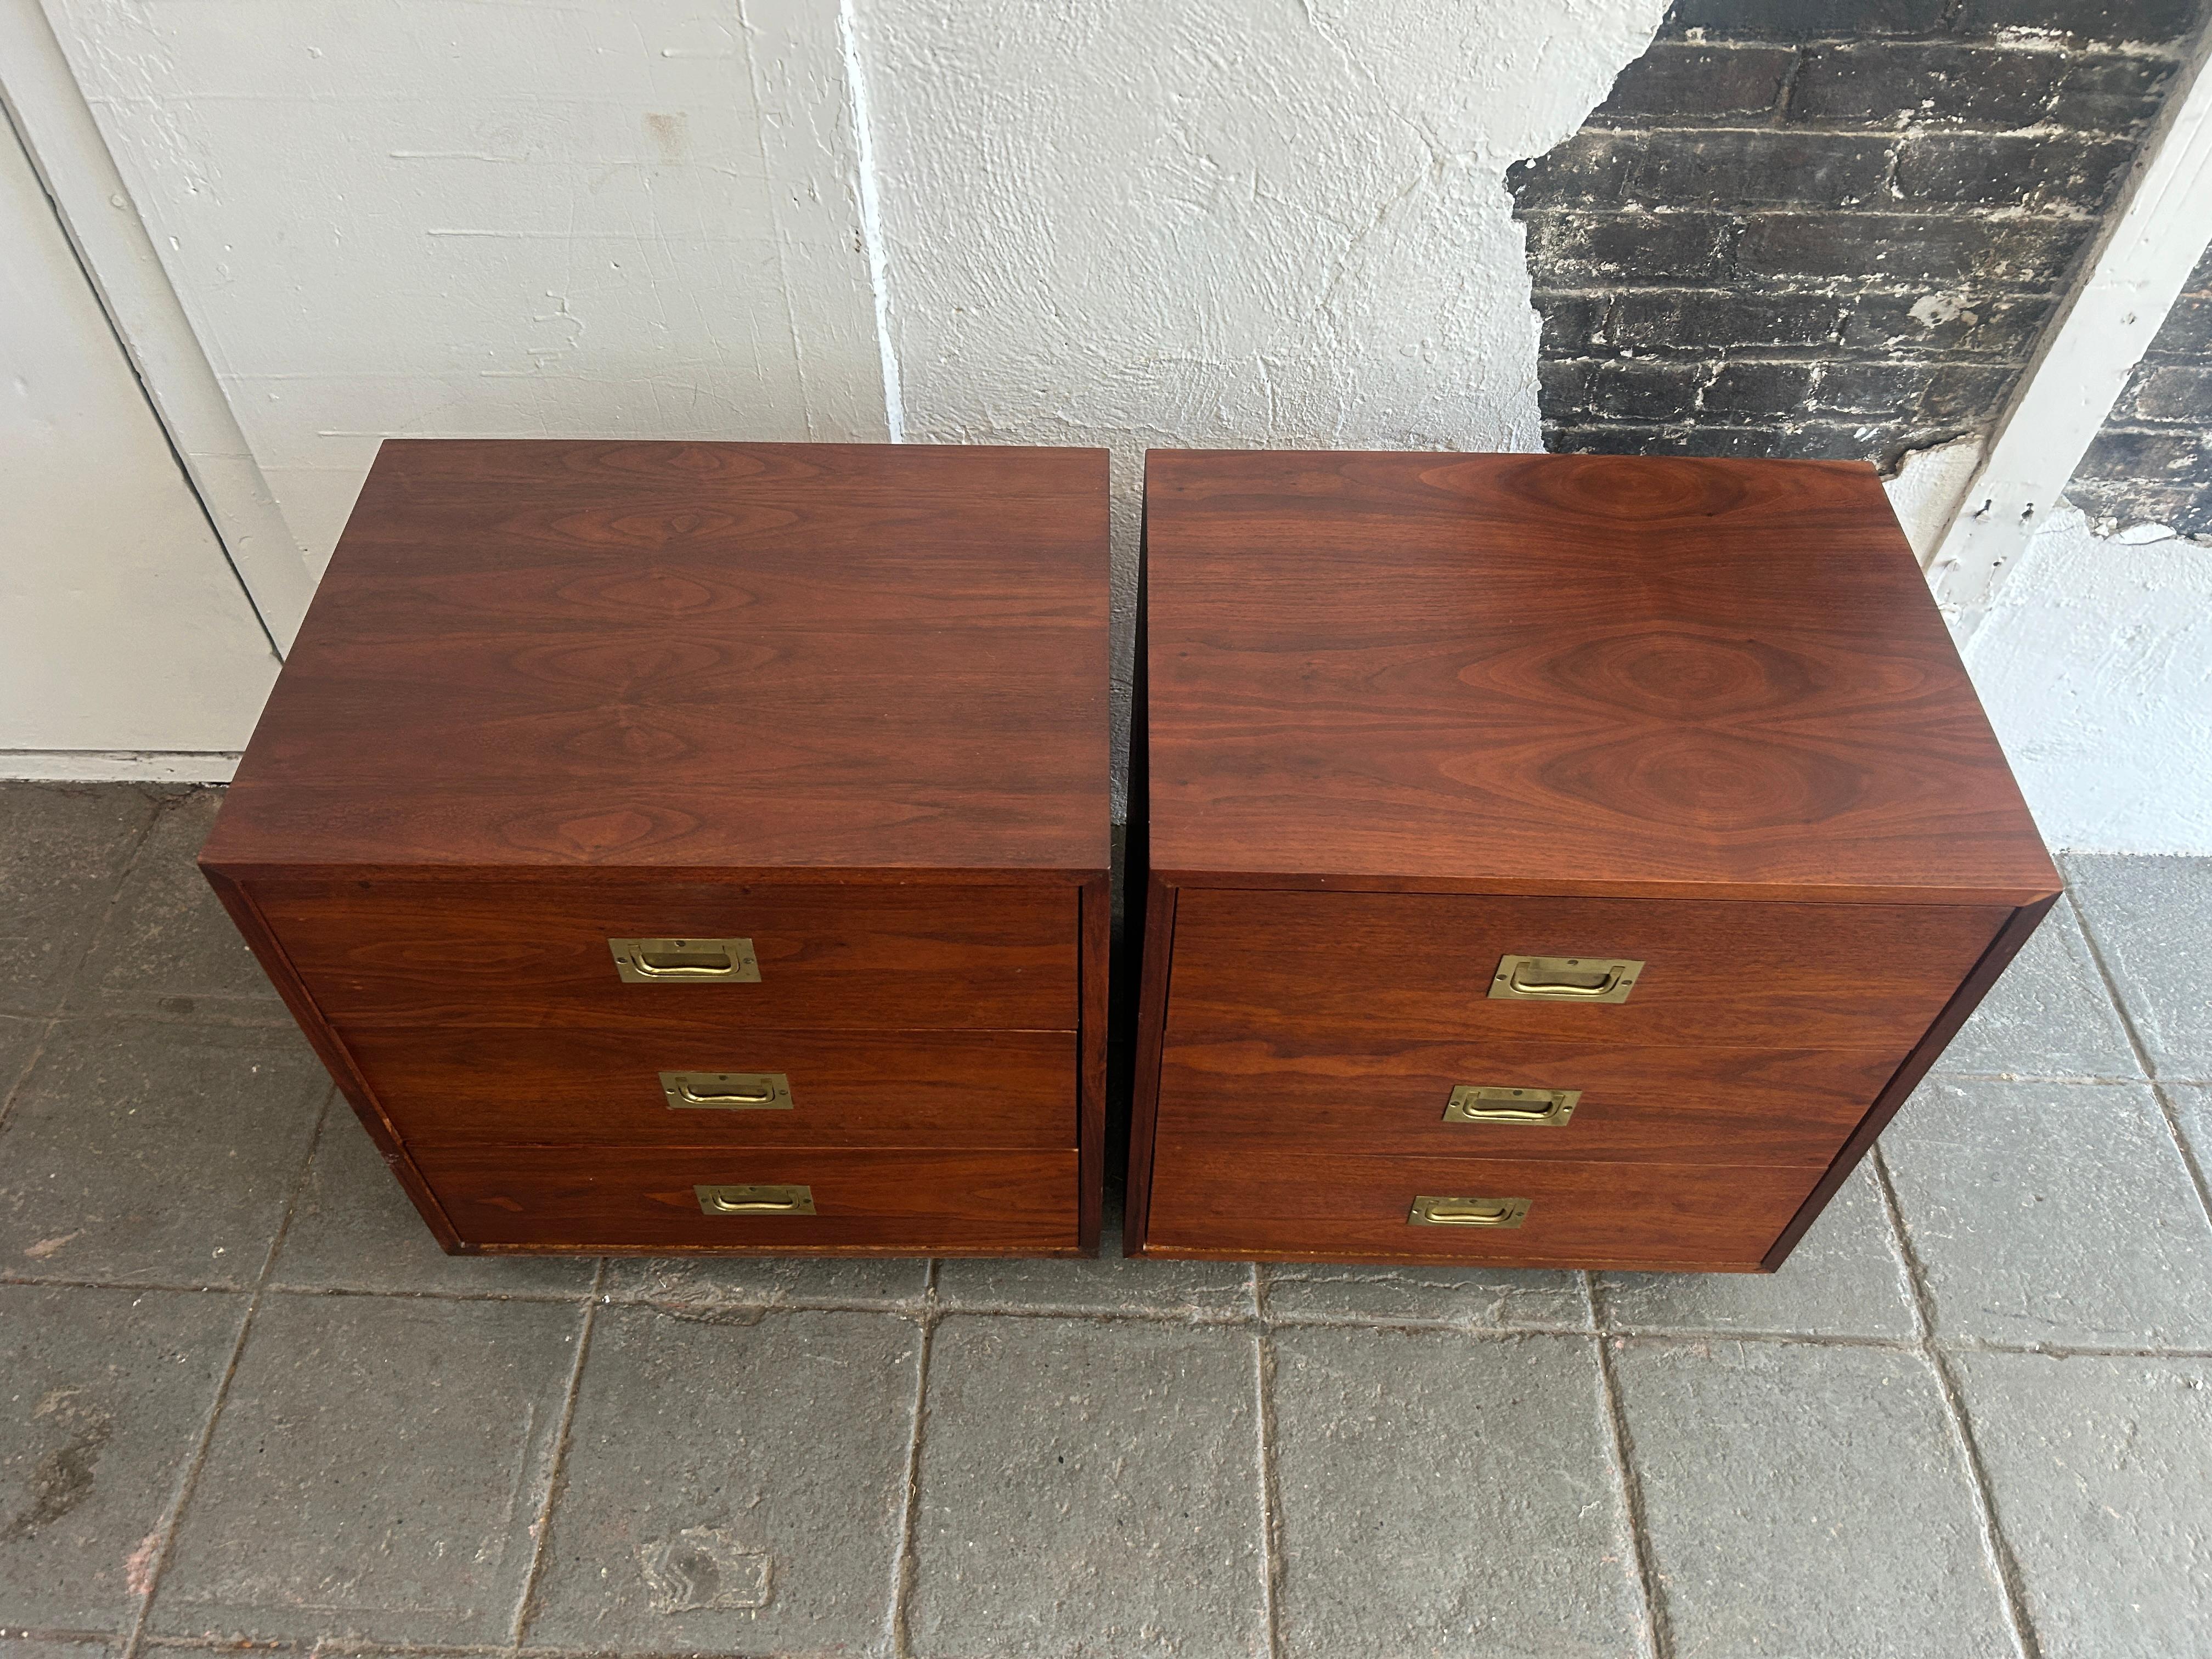 Mid century pair of 3 drawer walnut brass campaign style nightstands. Pair of small nightstands with 3 drawers campaign style with solid brass fold down handles. Each unit has a set of 4 small square legs. Good vintage condition made circa 1970 in